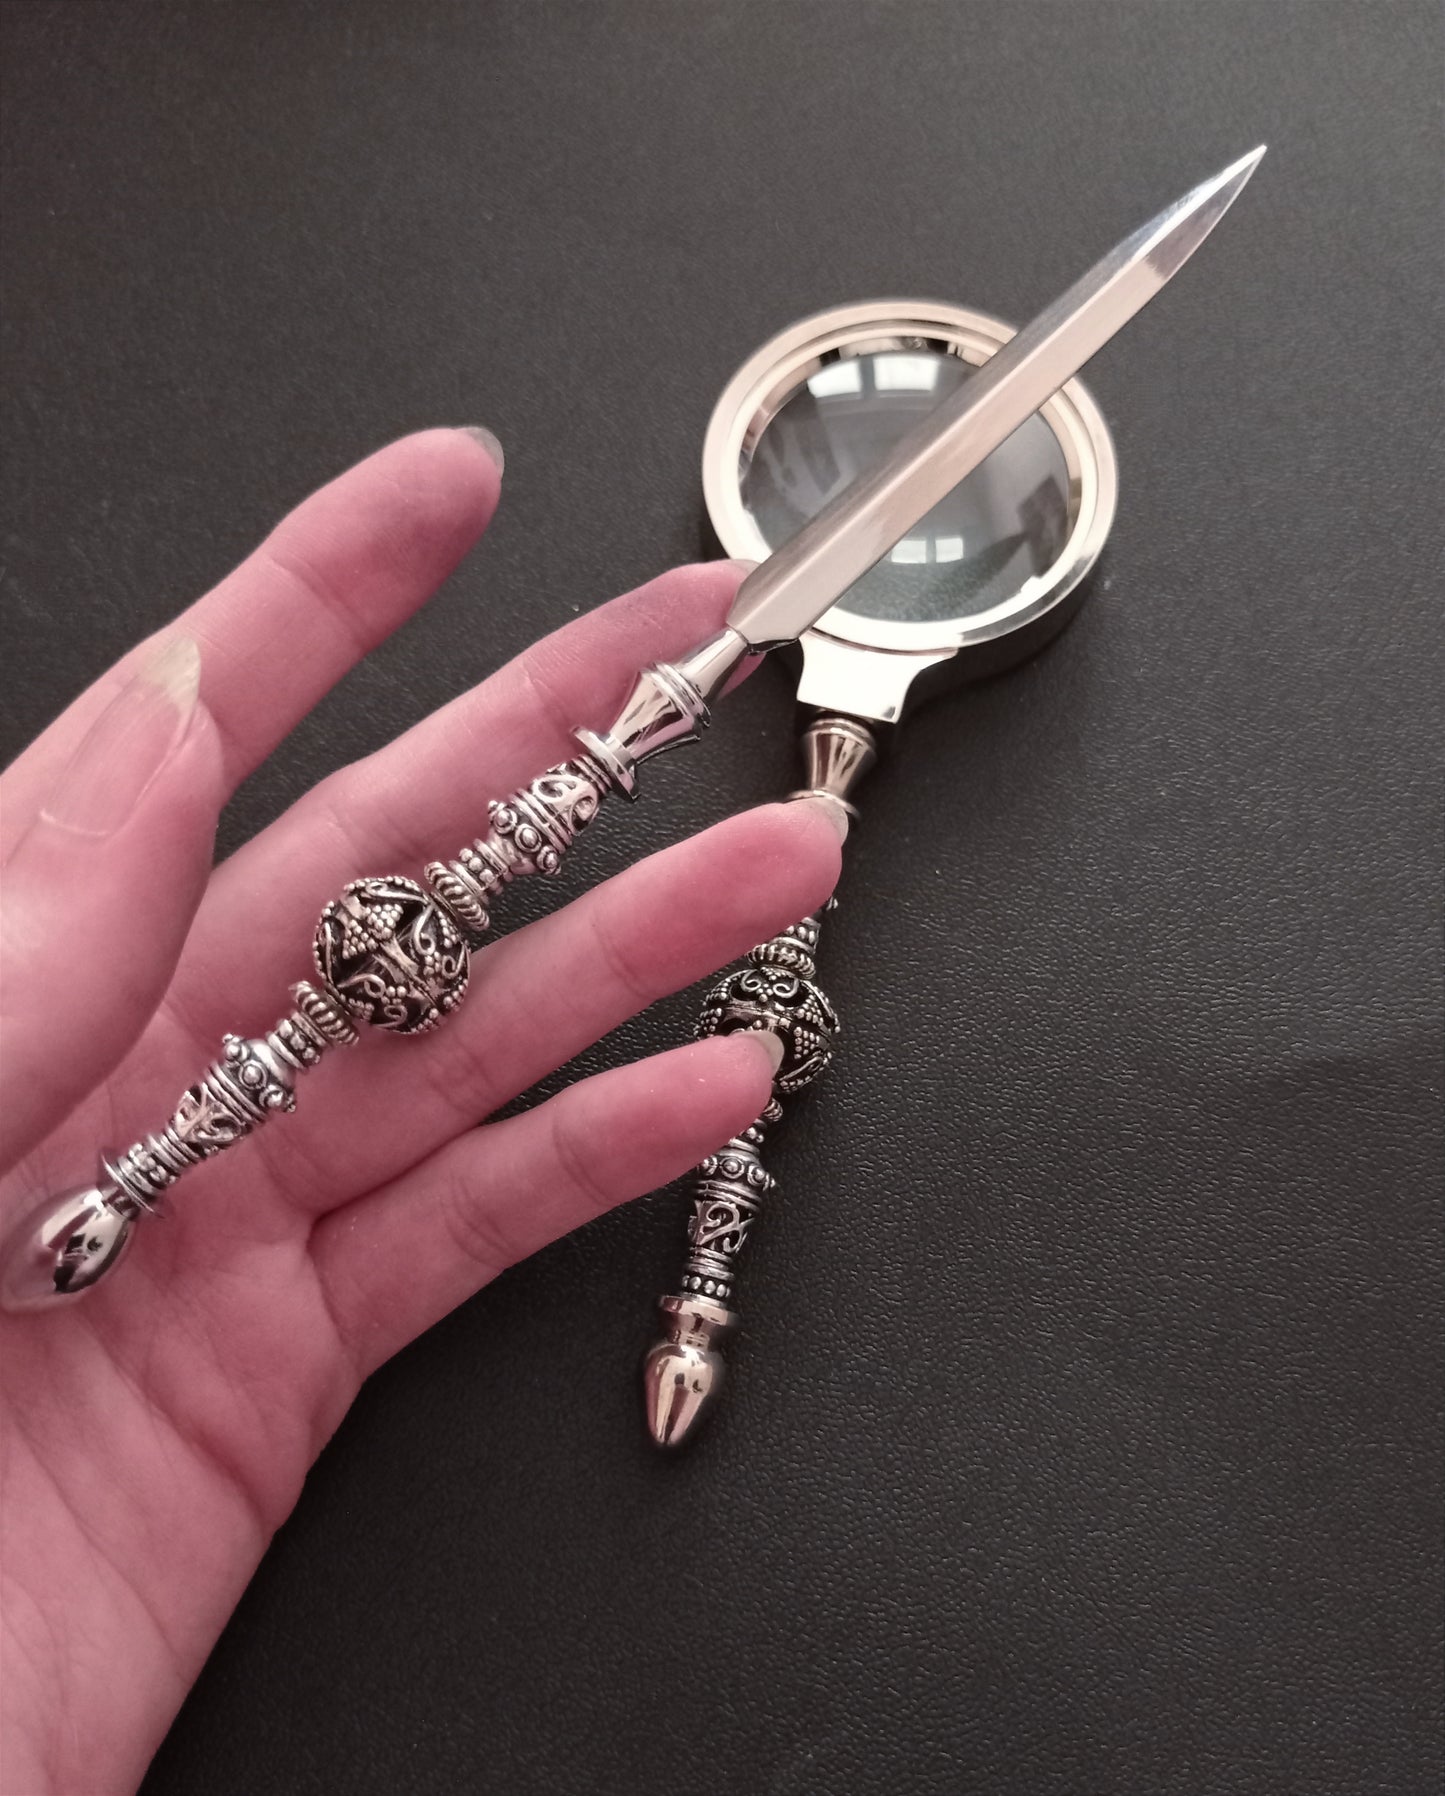 Silver Magnifying glass and letter opener set